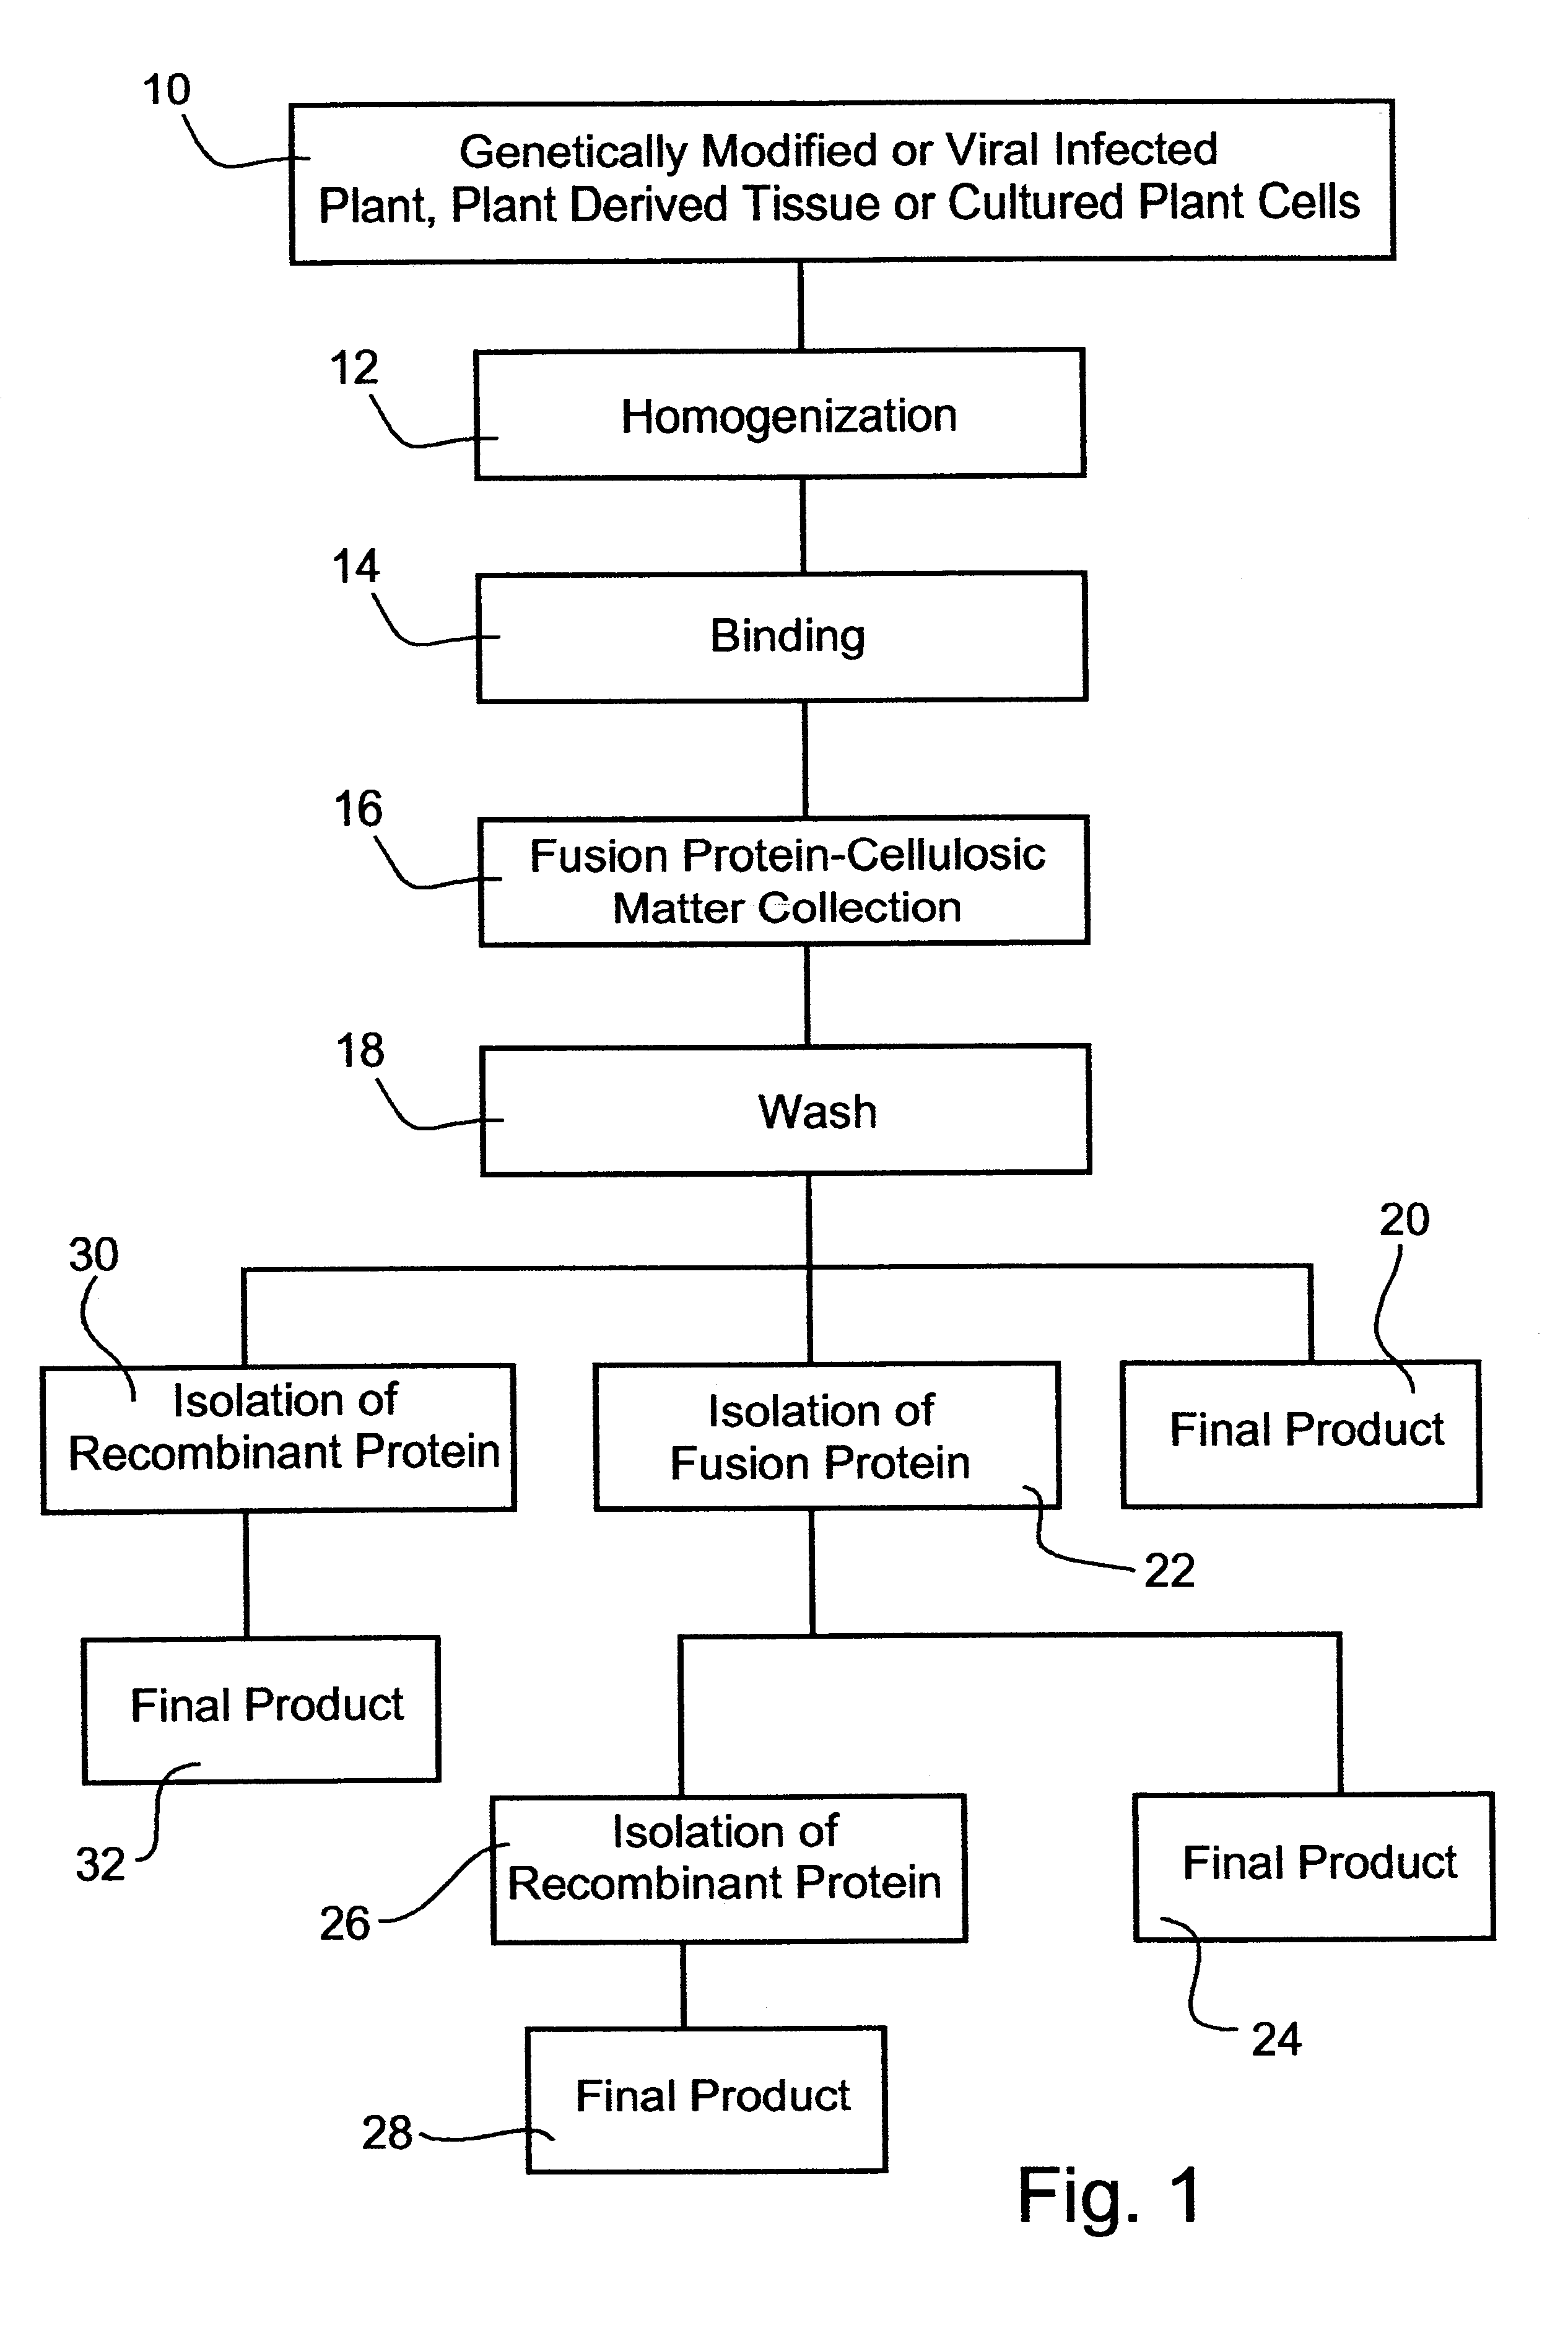 Process of expressing and isolating recombinant proteins and recombinant protein products from plants, plant derived tissues or cultured plant cells